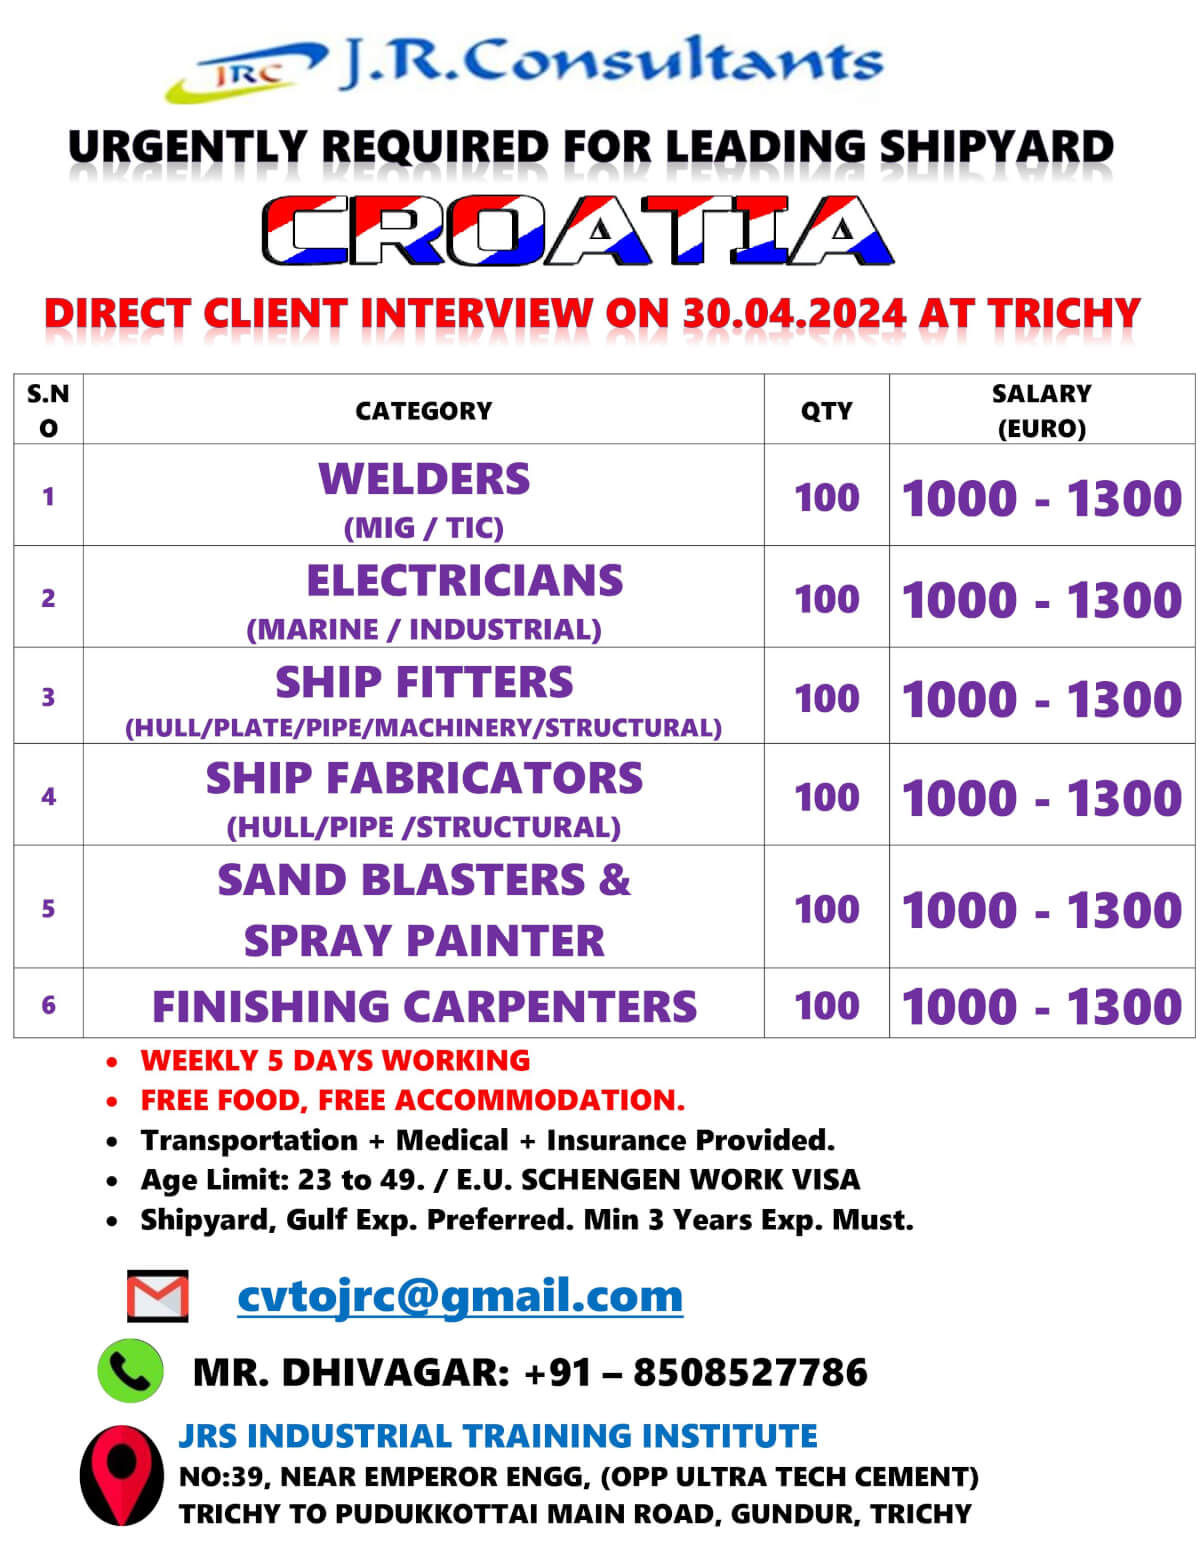 WALK IN INTERVIEW AT TRICHY FOR CROATIA